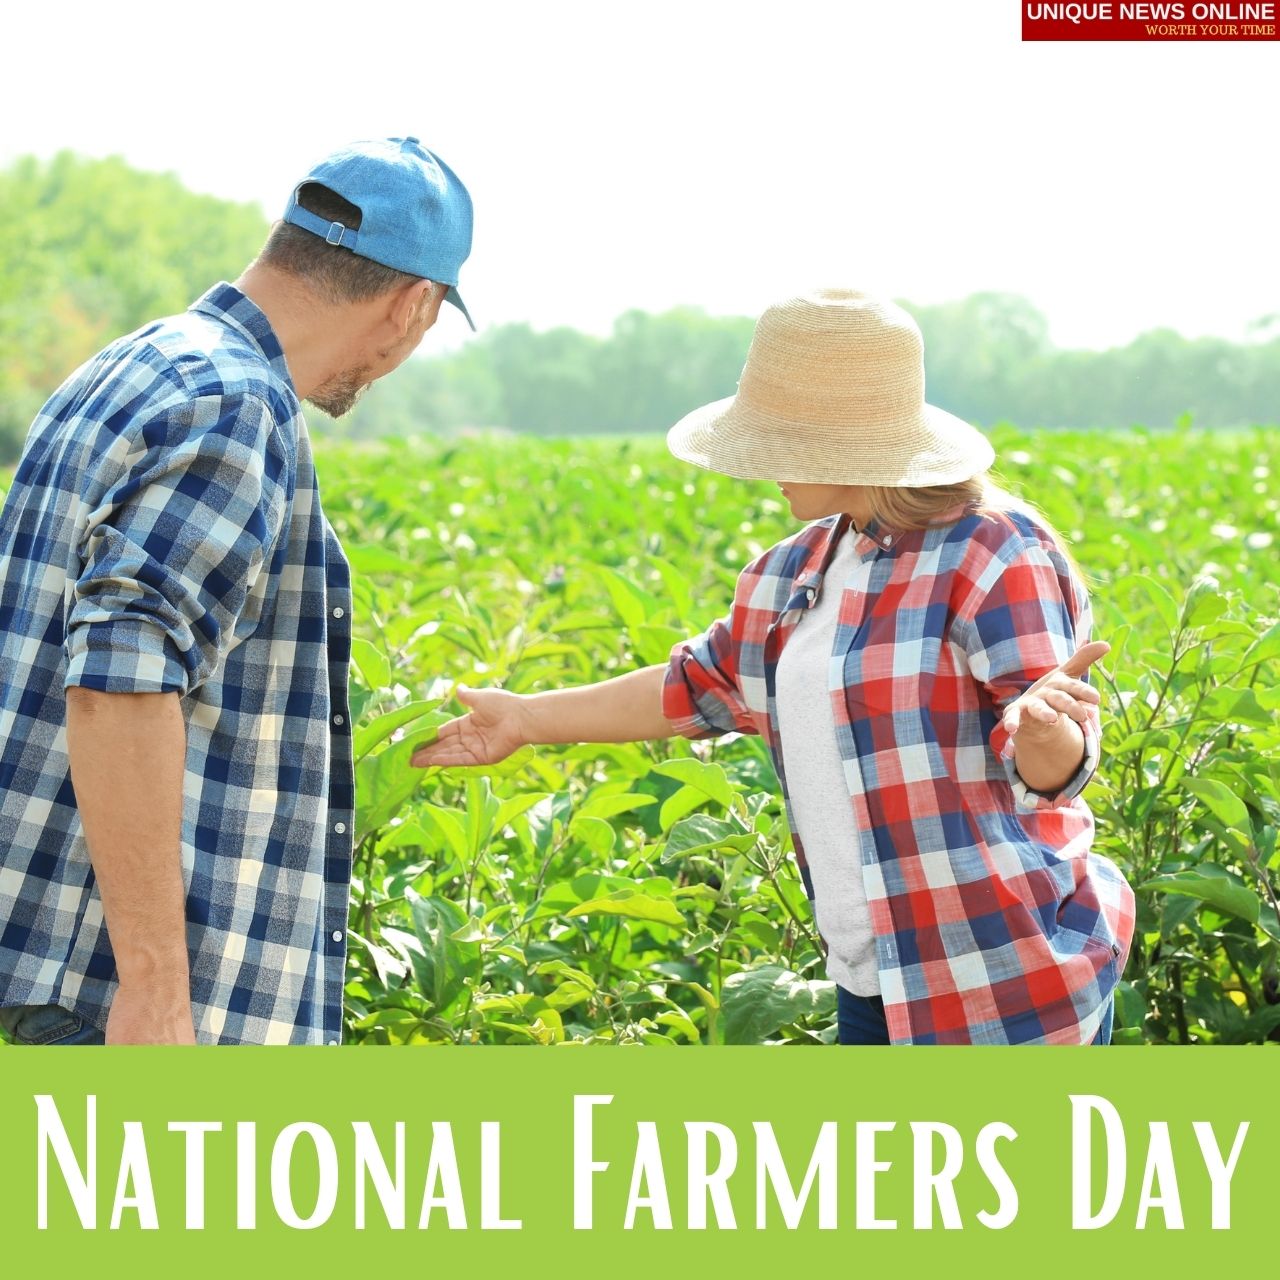 National Farmers Day (US) 2021 Quotes, Wishes, Images, Messages, and Greetings to share